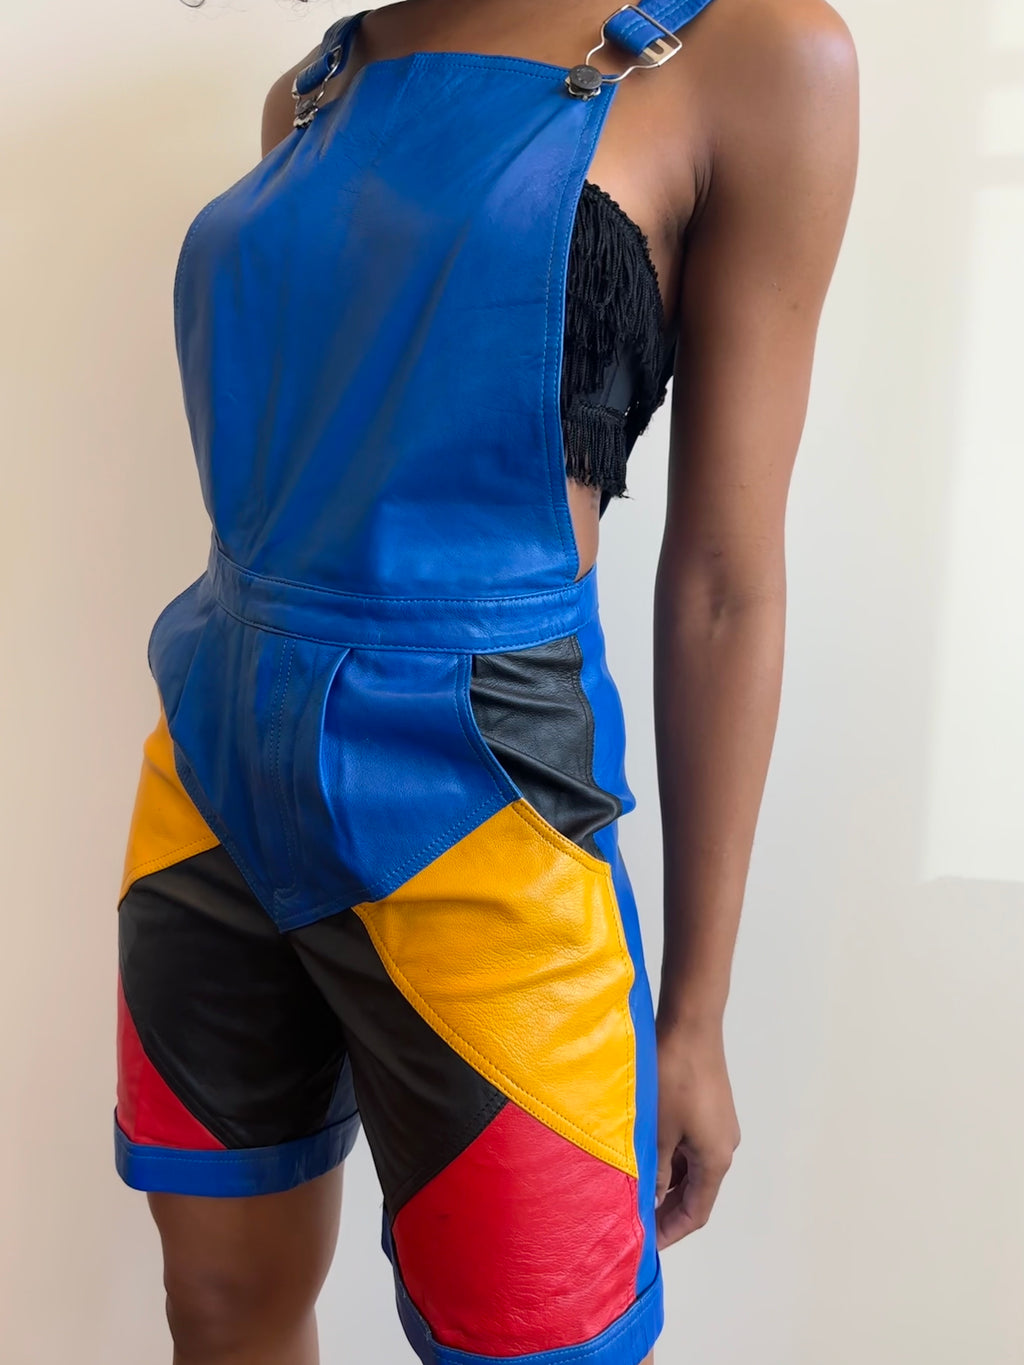 Vintage “That Girl” Colorblock Leather Romper